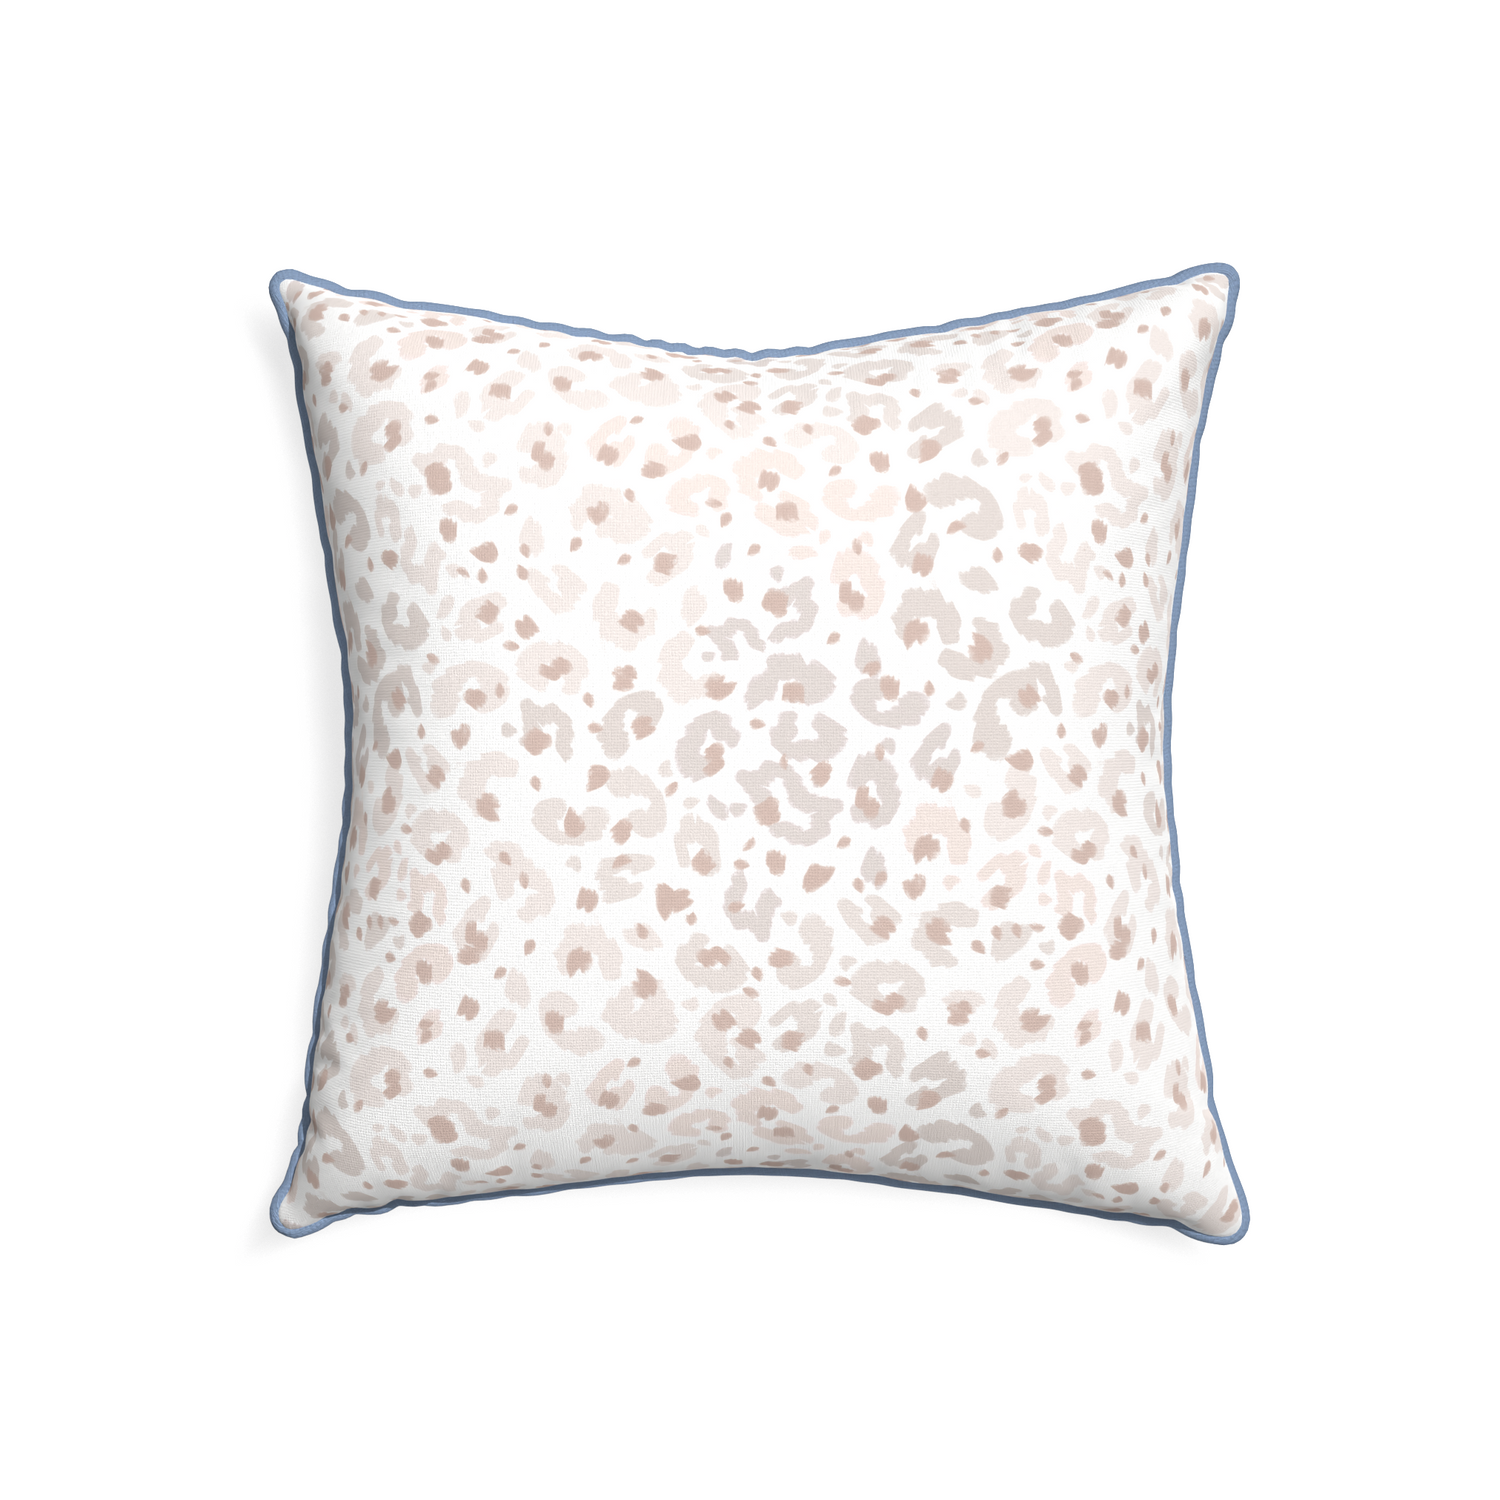 22-square rosie custom pillow with sky piping on white background